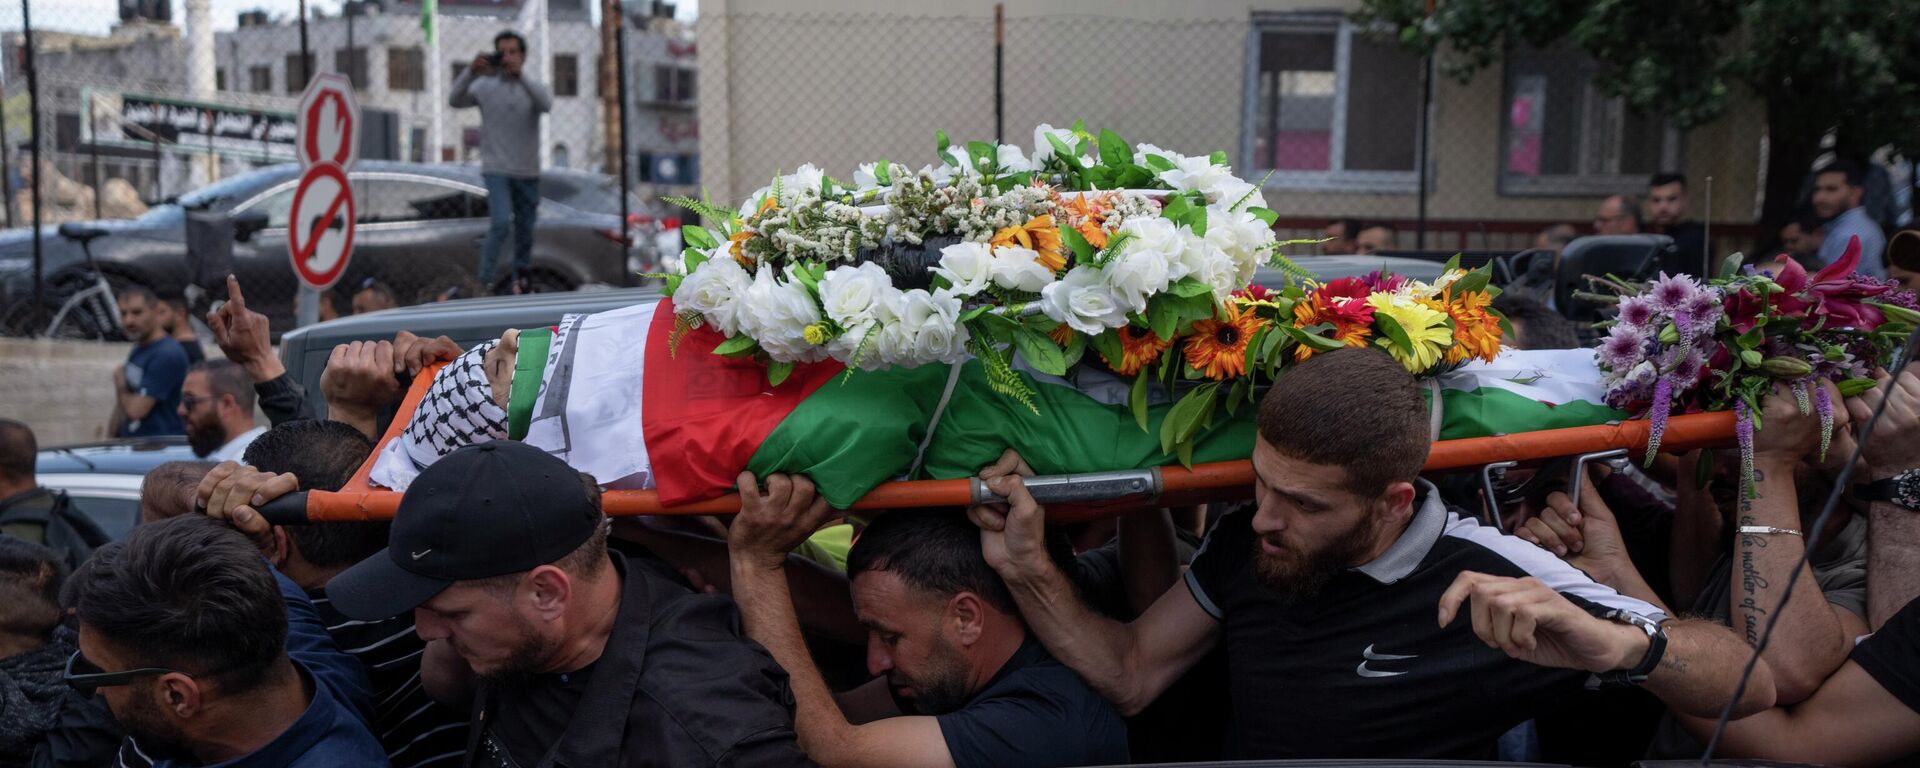 Palestinian mourners carry the body of Shireen Abu Akleh out of the office of Al Jazeera after friends and colleagues paid their respects, in the West Bank city of Ramallah, Wednesday, May 11, 2022. - Sputnik International, 1920, 11.05.2022